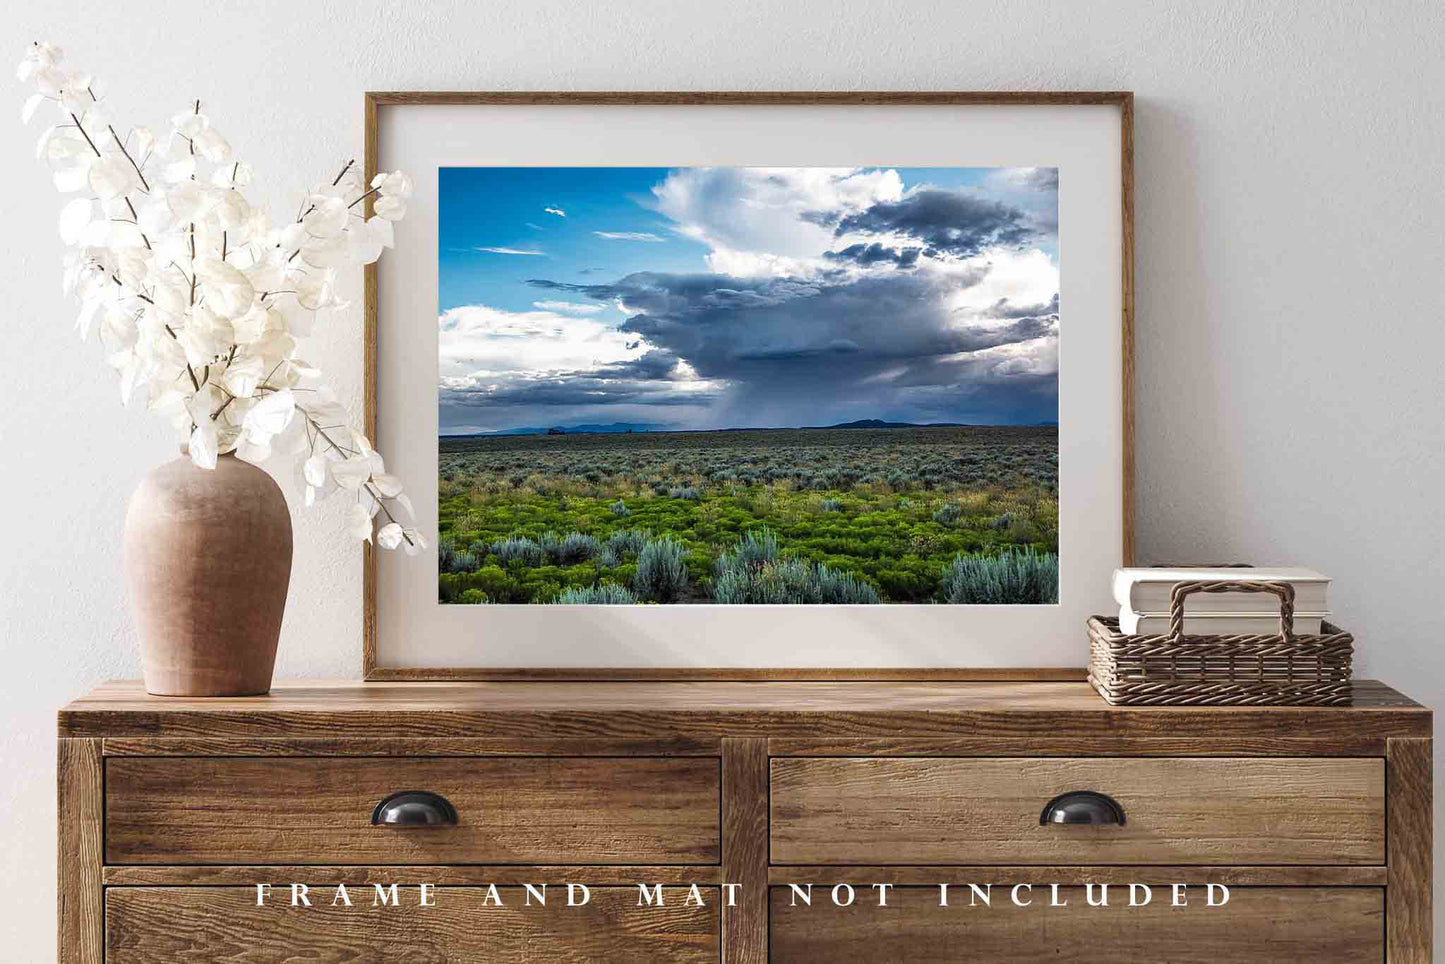 Desert Photography Print - Picture of Monsoon Storm Over Mountains Near Taos New Mexico Scenic Southwest Sky Landscape Decor 4x6 to 30x45